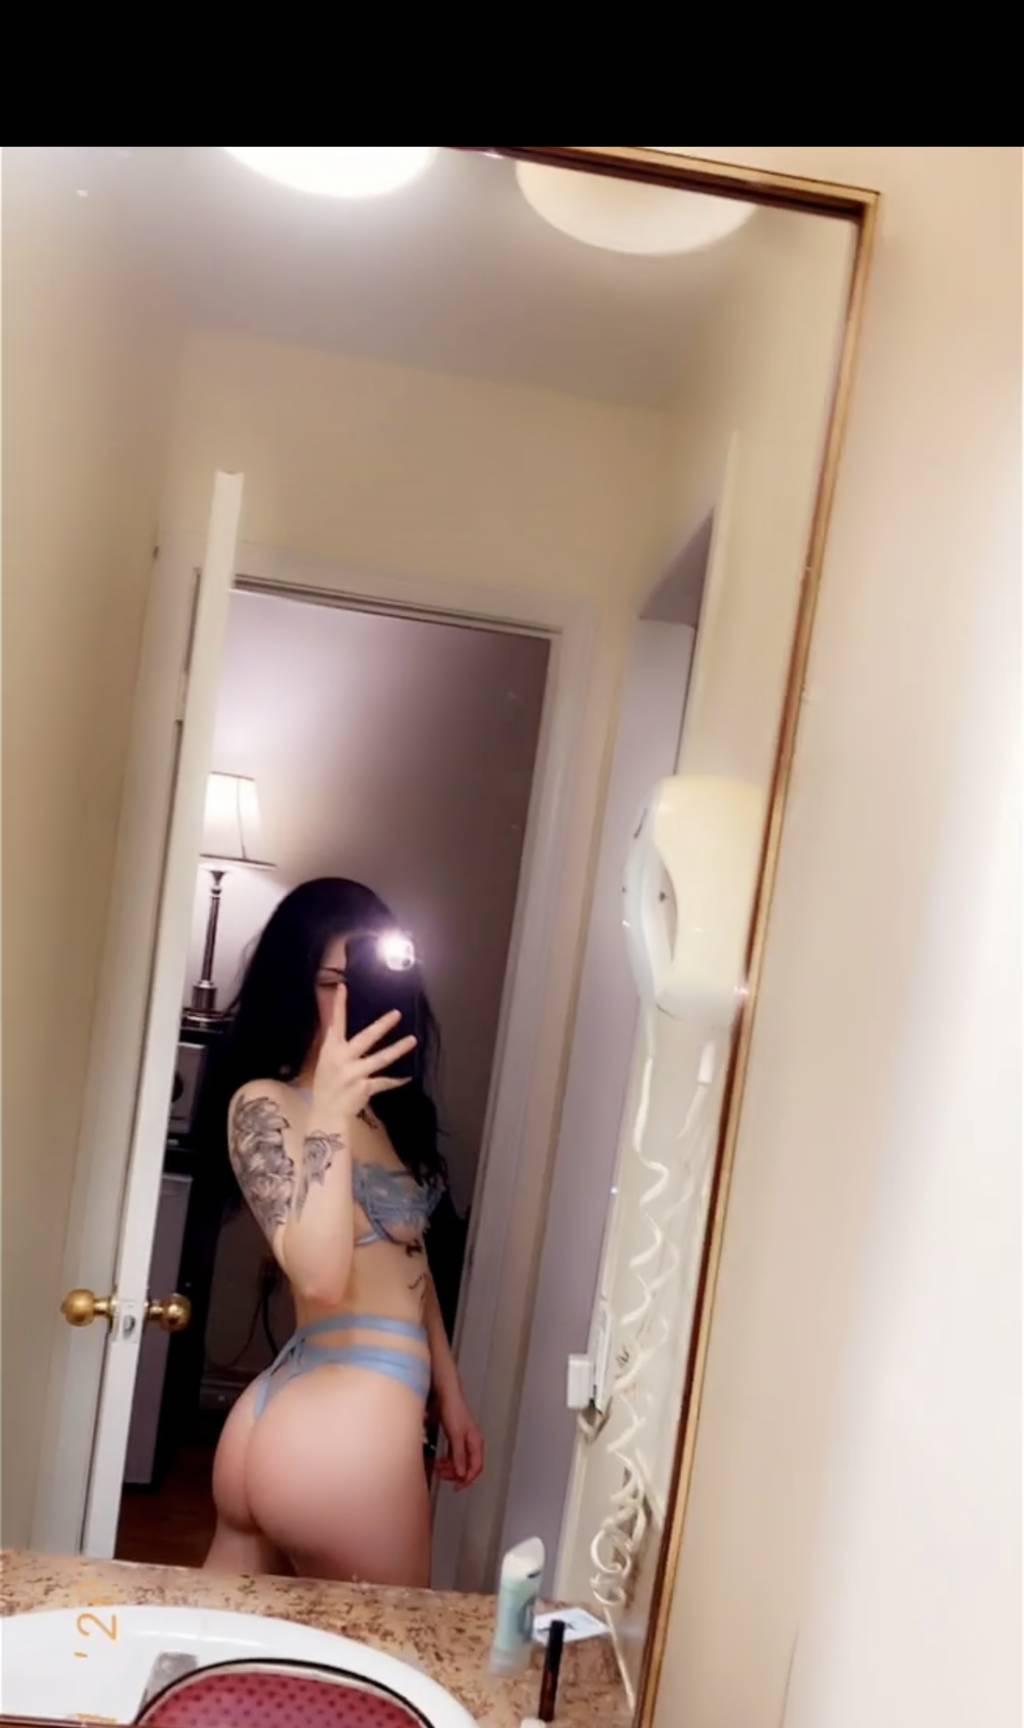 young tight pu$$y new in town and duos available !!!